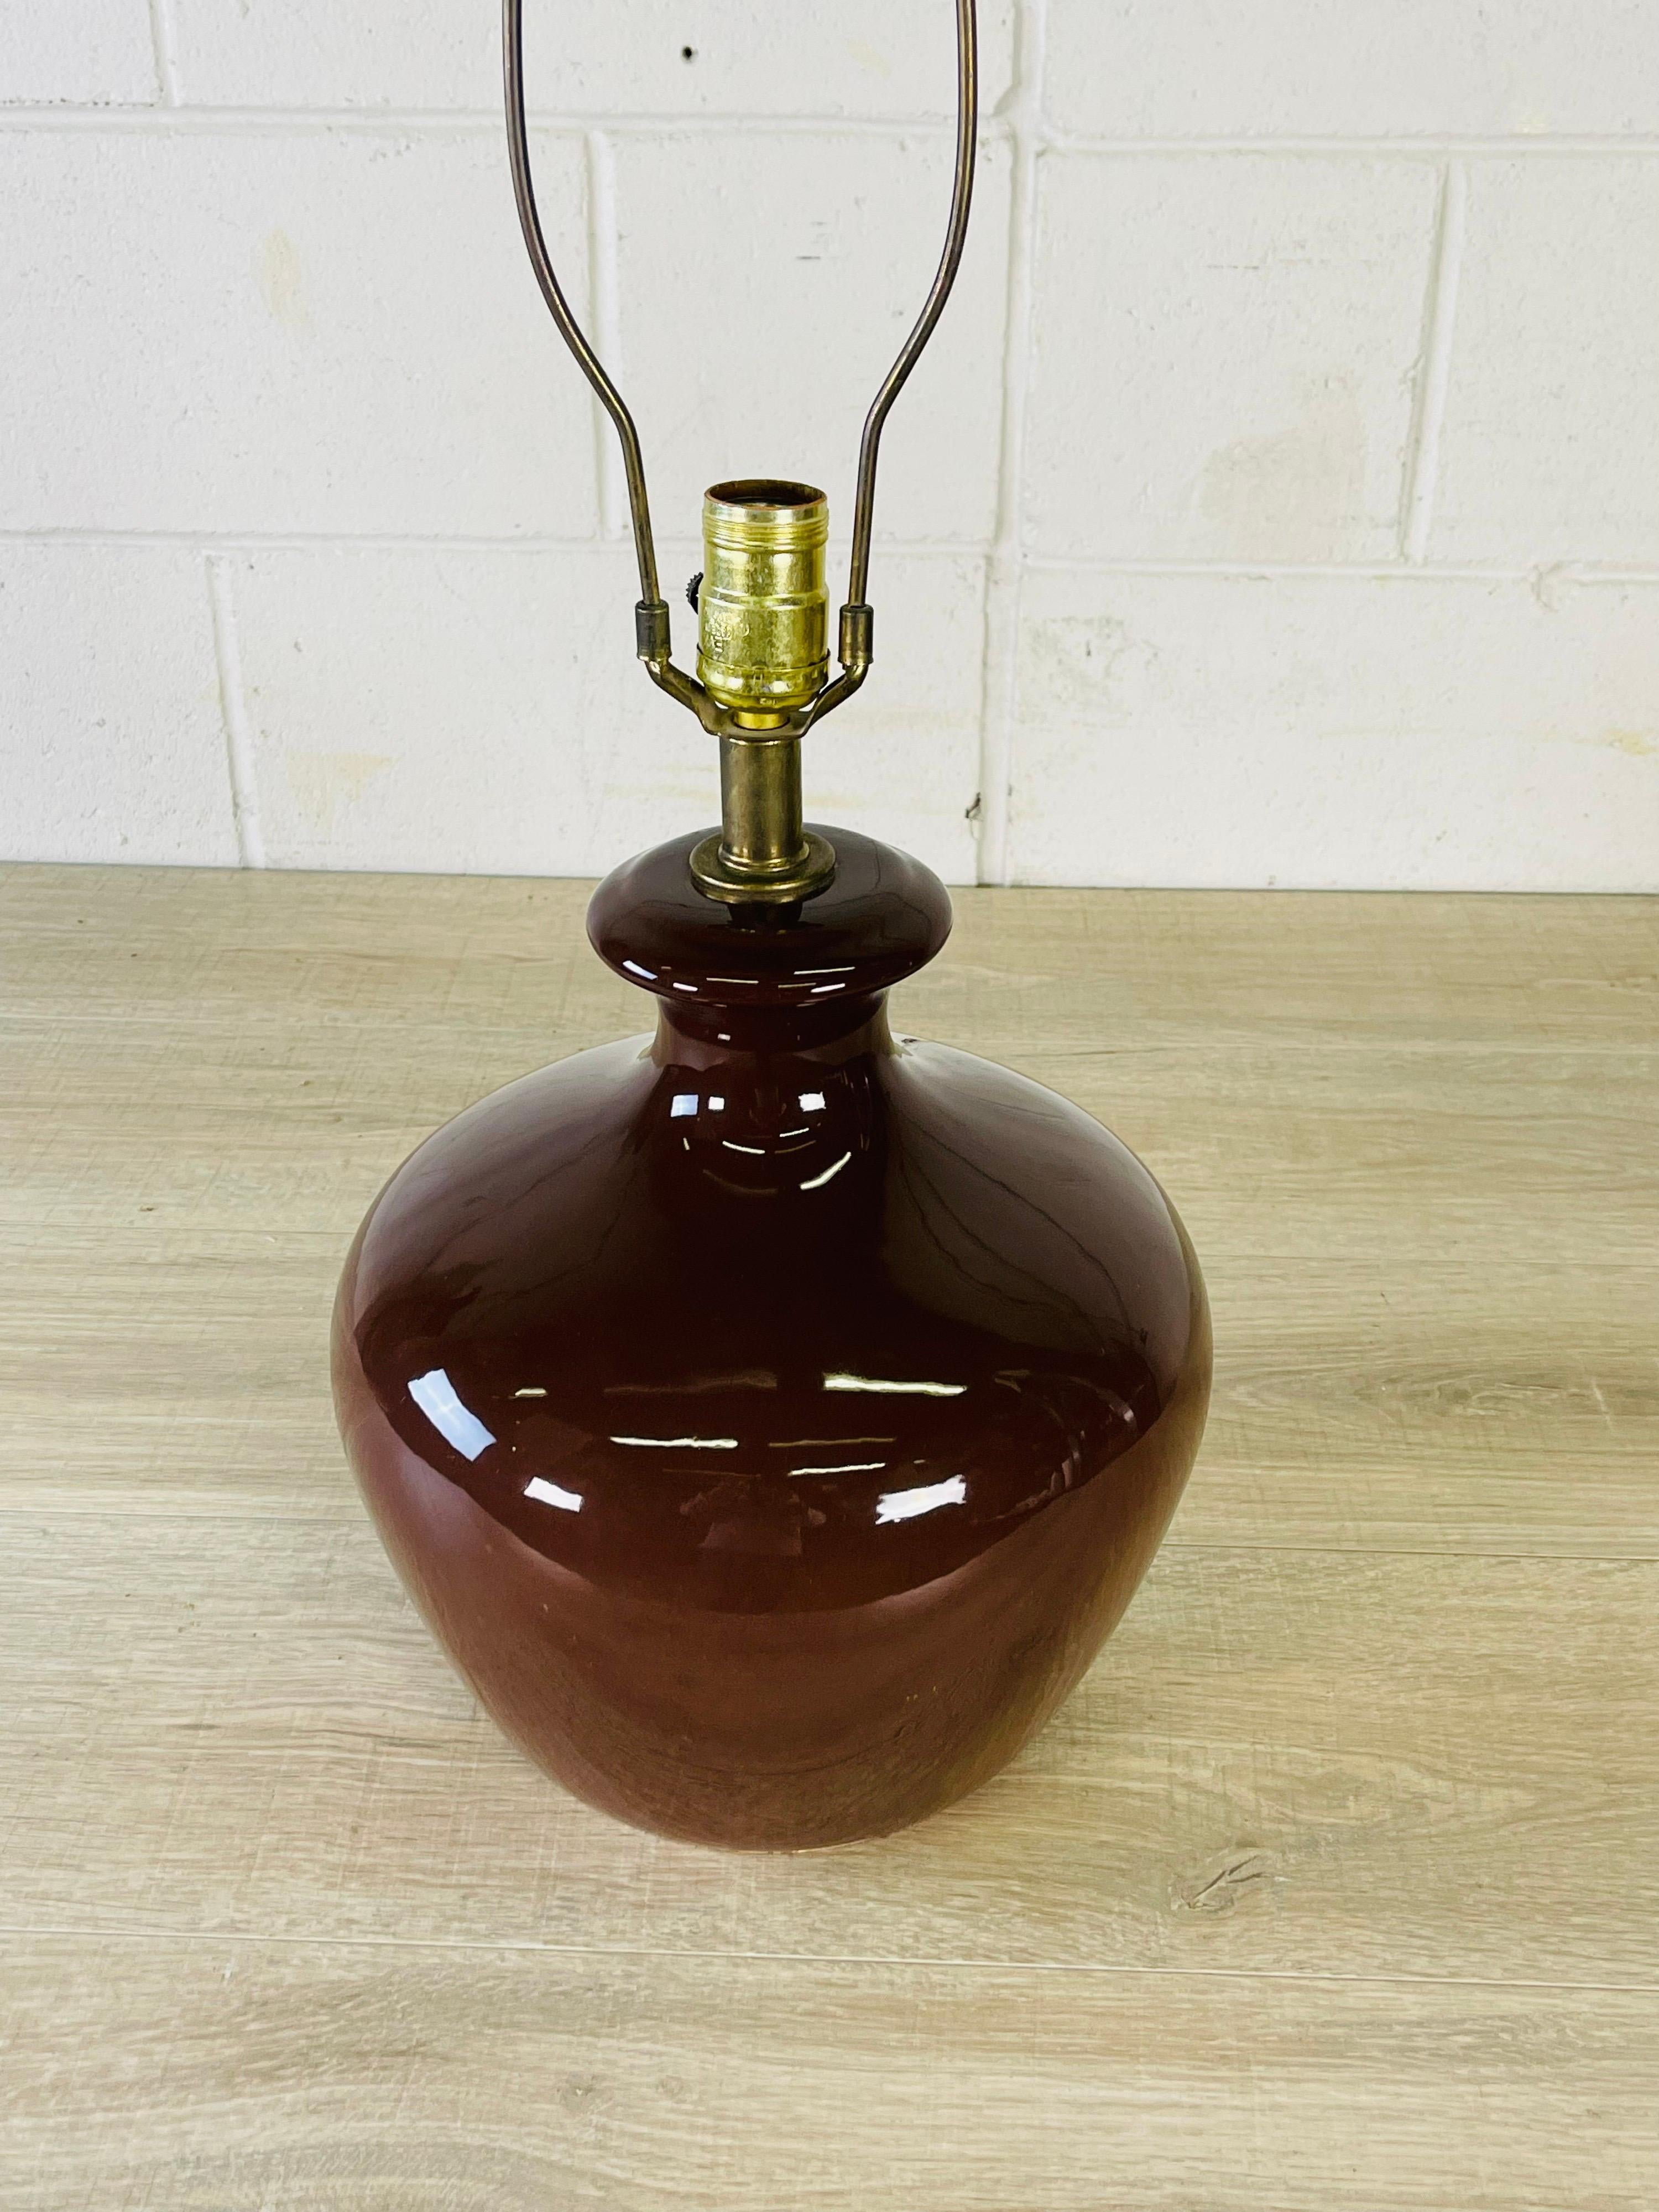 Vintage 1970s brown ceramic bulbous table lamp. Wired for the US and in working condition. Uses a standard 100 watt bulb. Socket, 16.5”H. Harp, 4” diameter x 9” height. No marks.